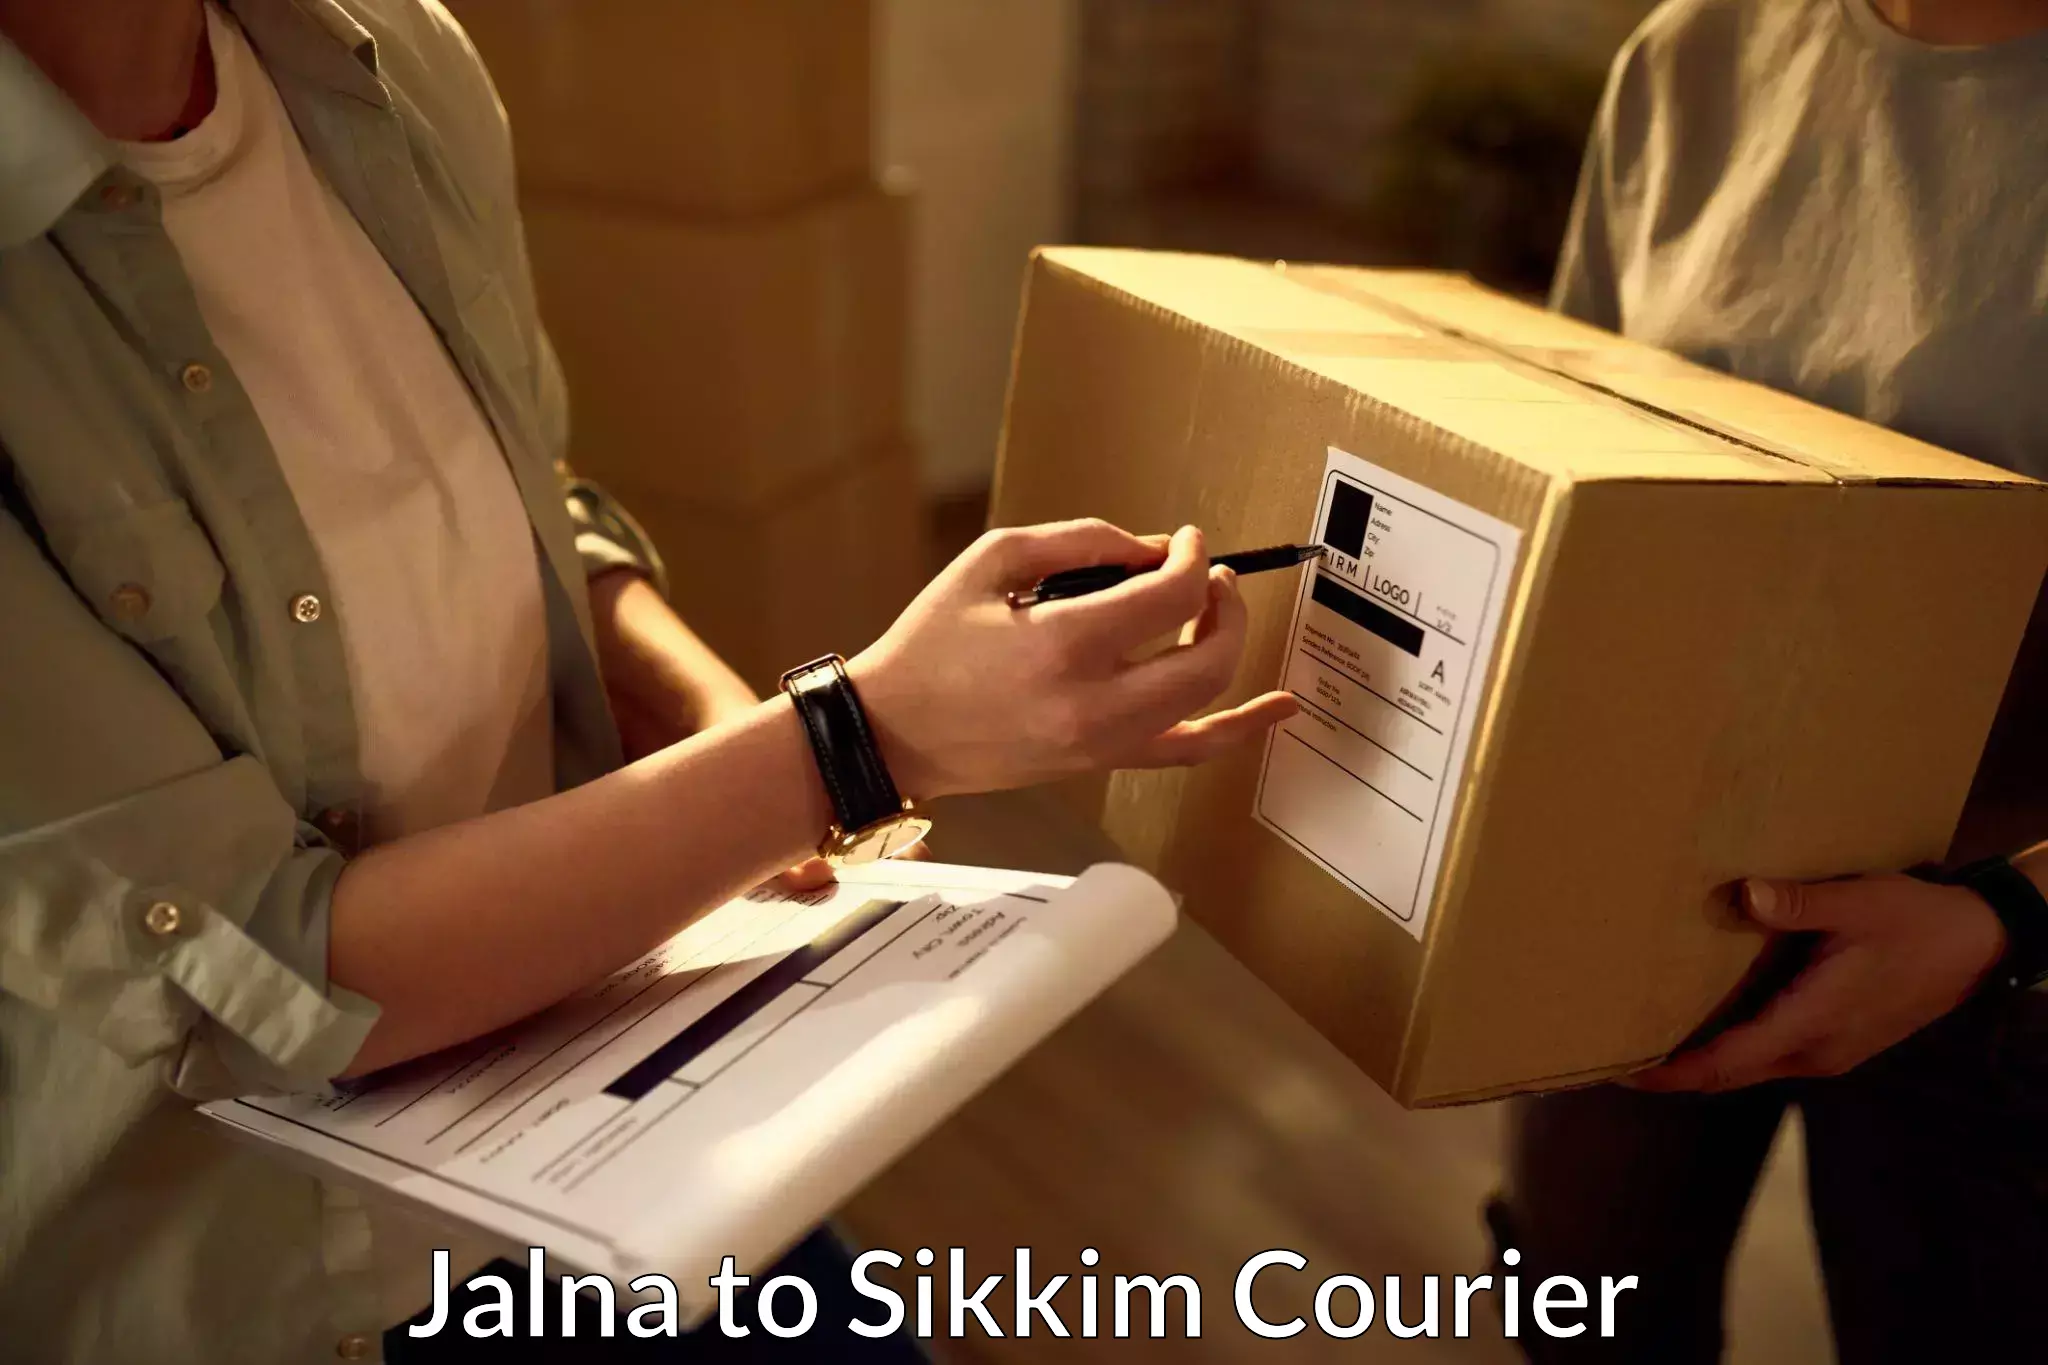 Global shipping networks Jalna to Pelling